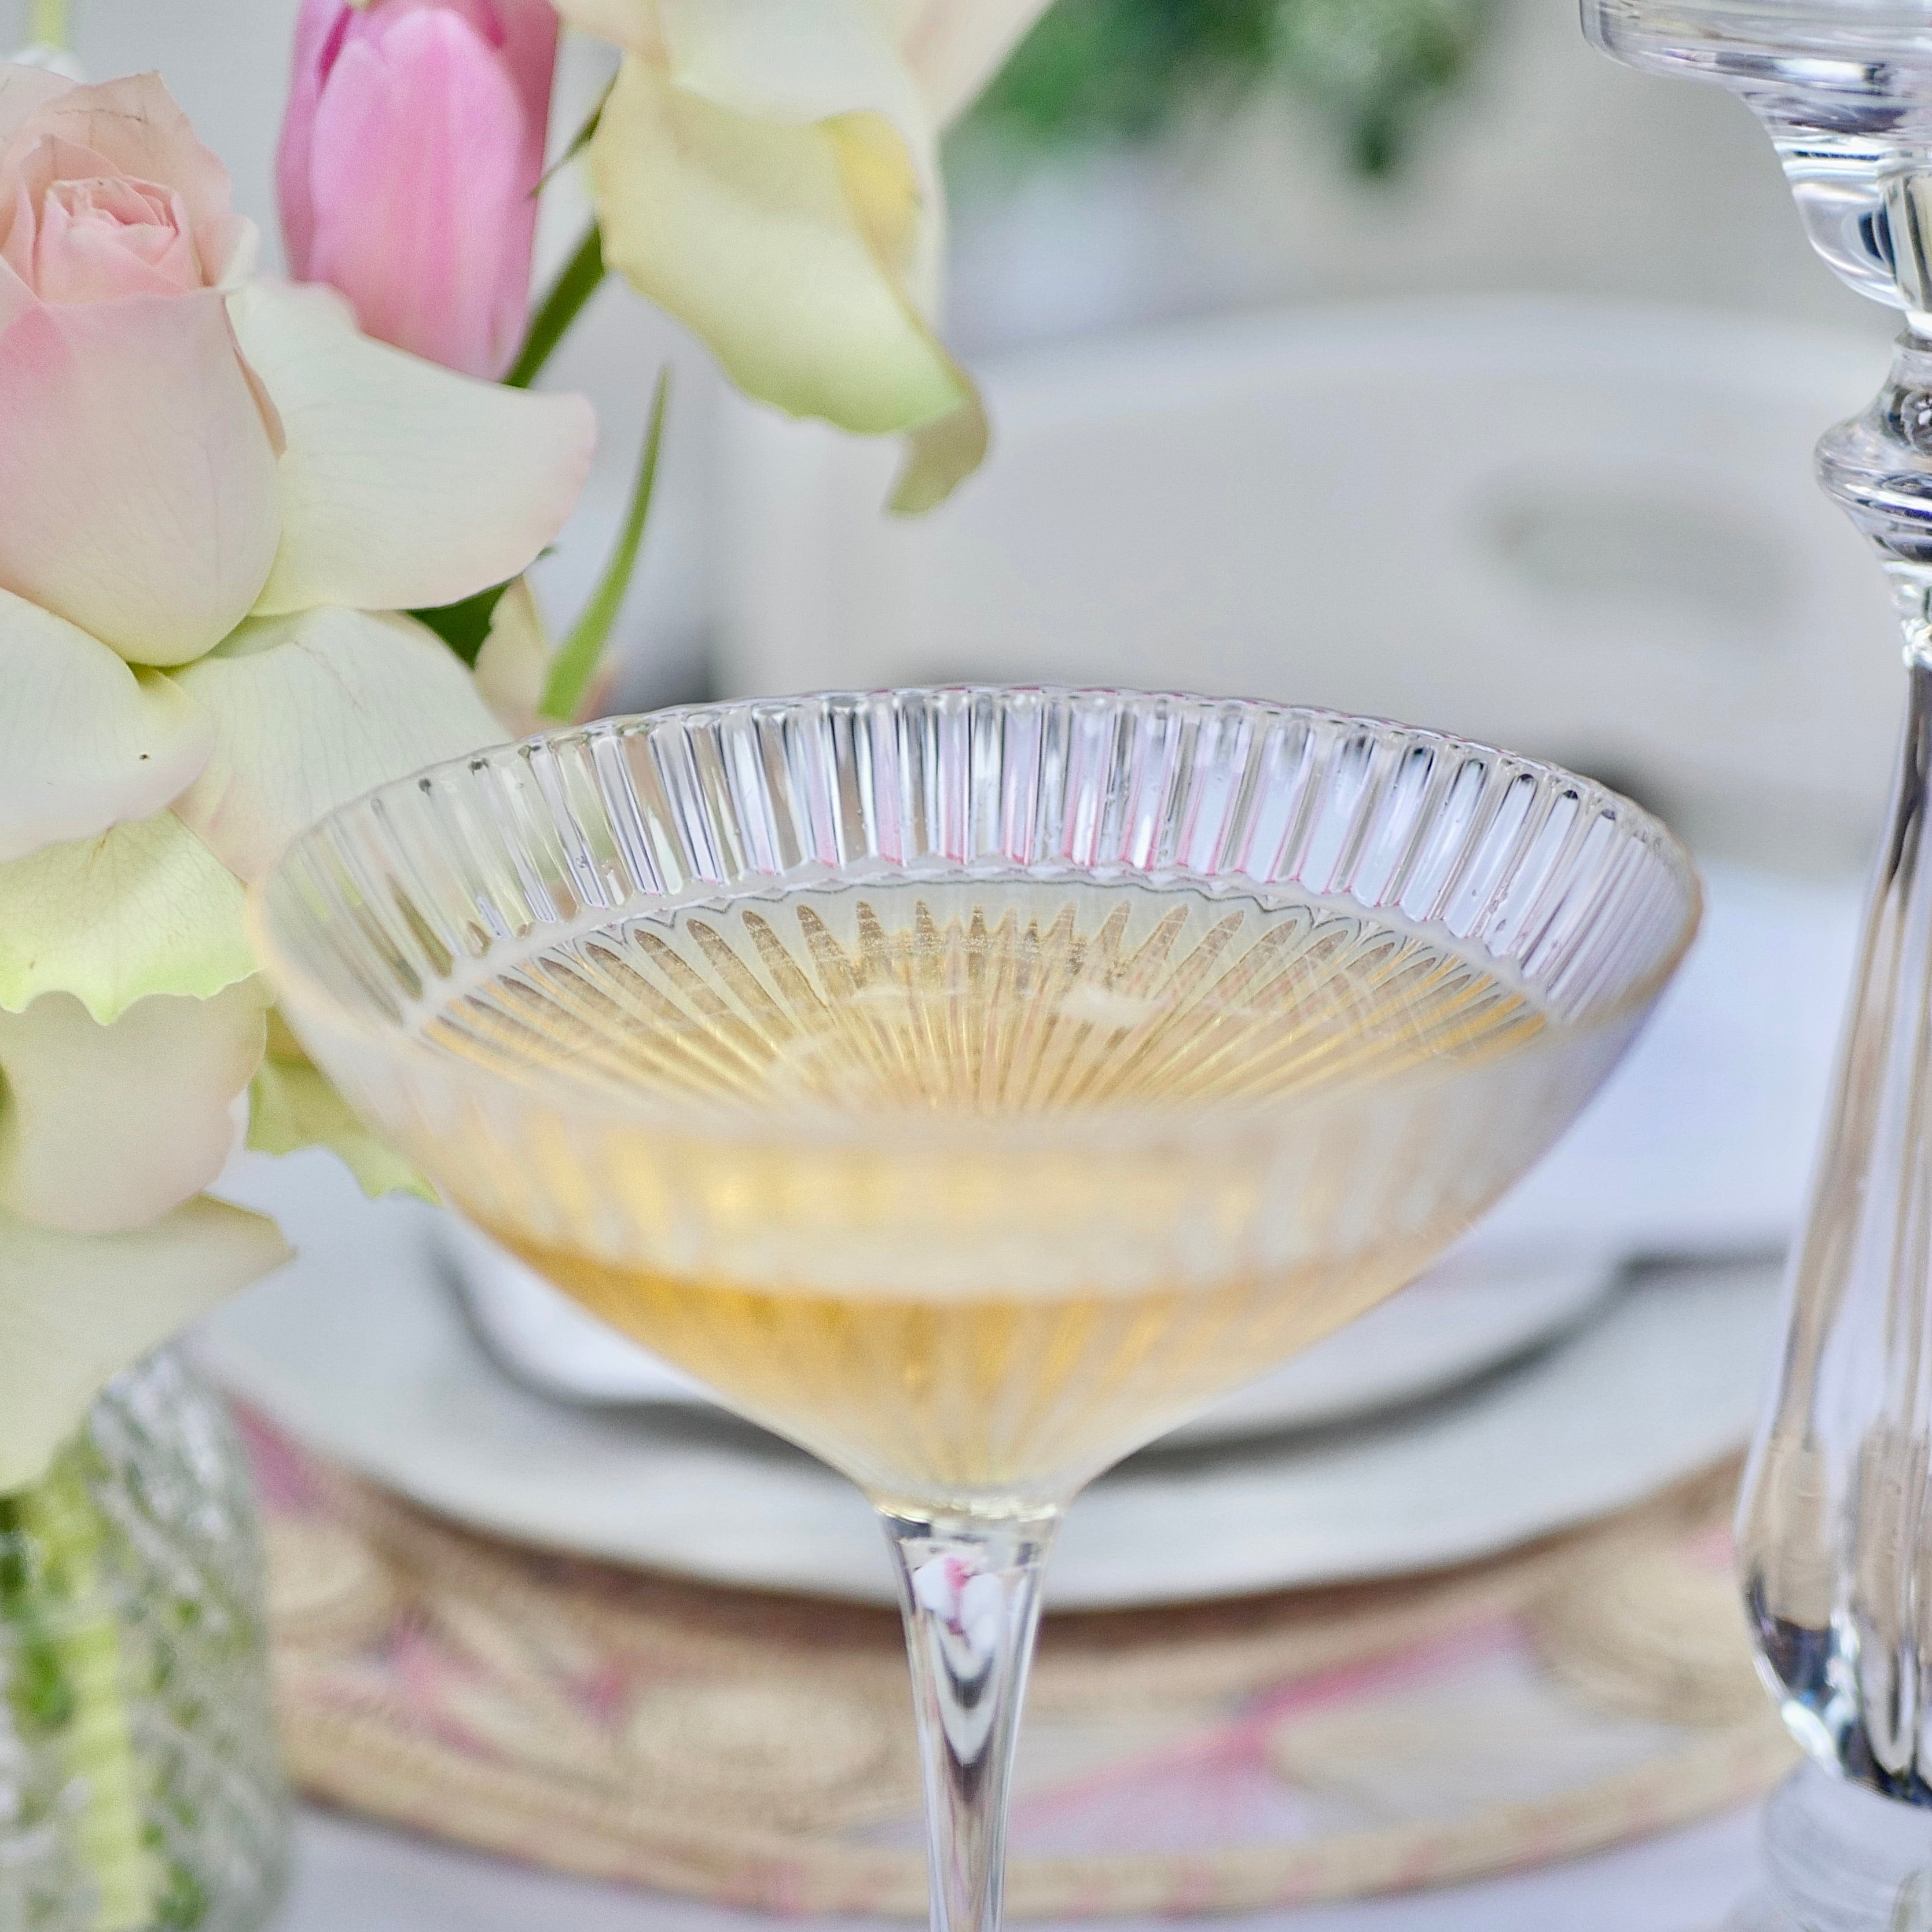 ribbed, elegant Champagne Coupe